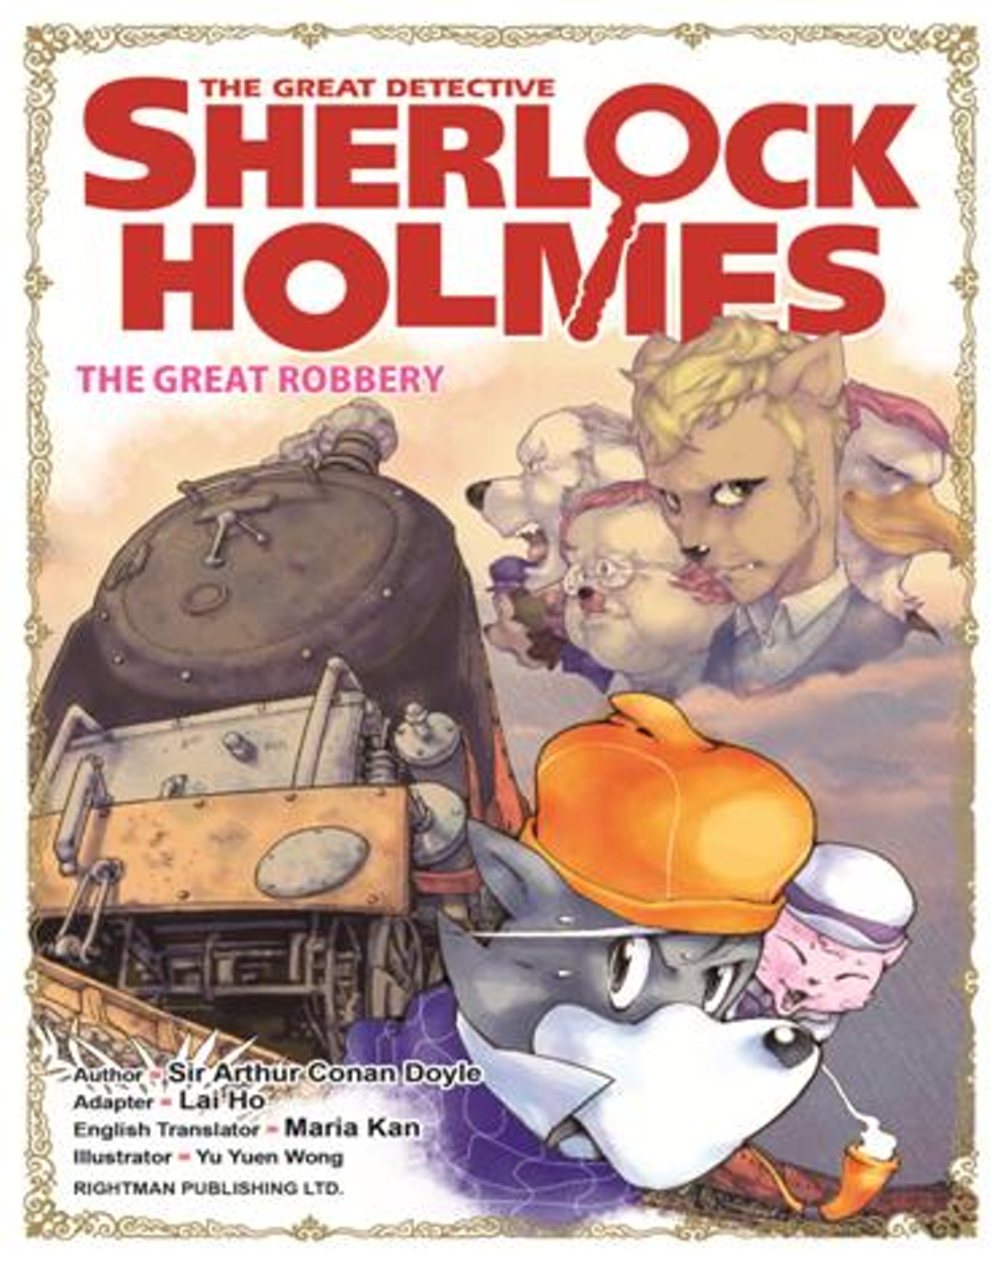 THE GREAT DETECTIVE SHERLOCK HOLMES  (9)THE GREAT ROBBERY